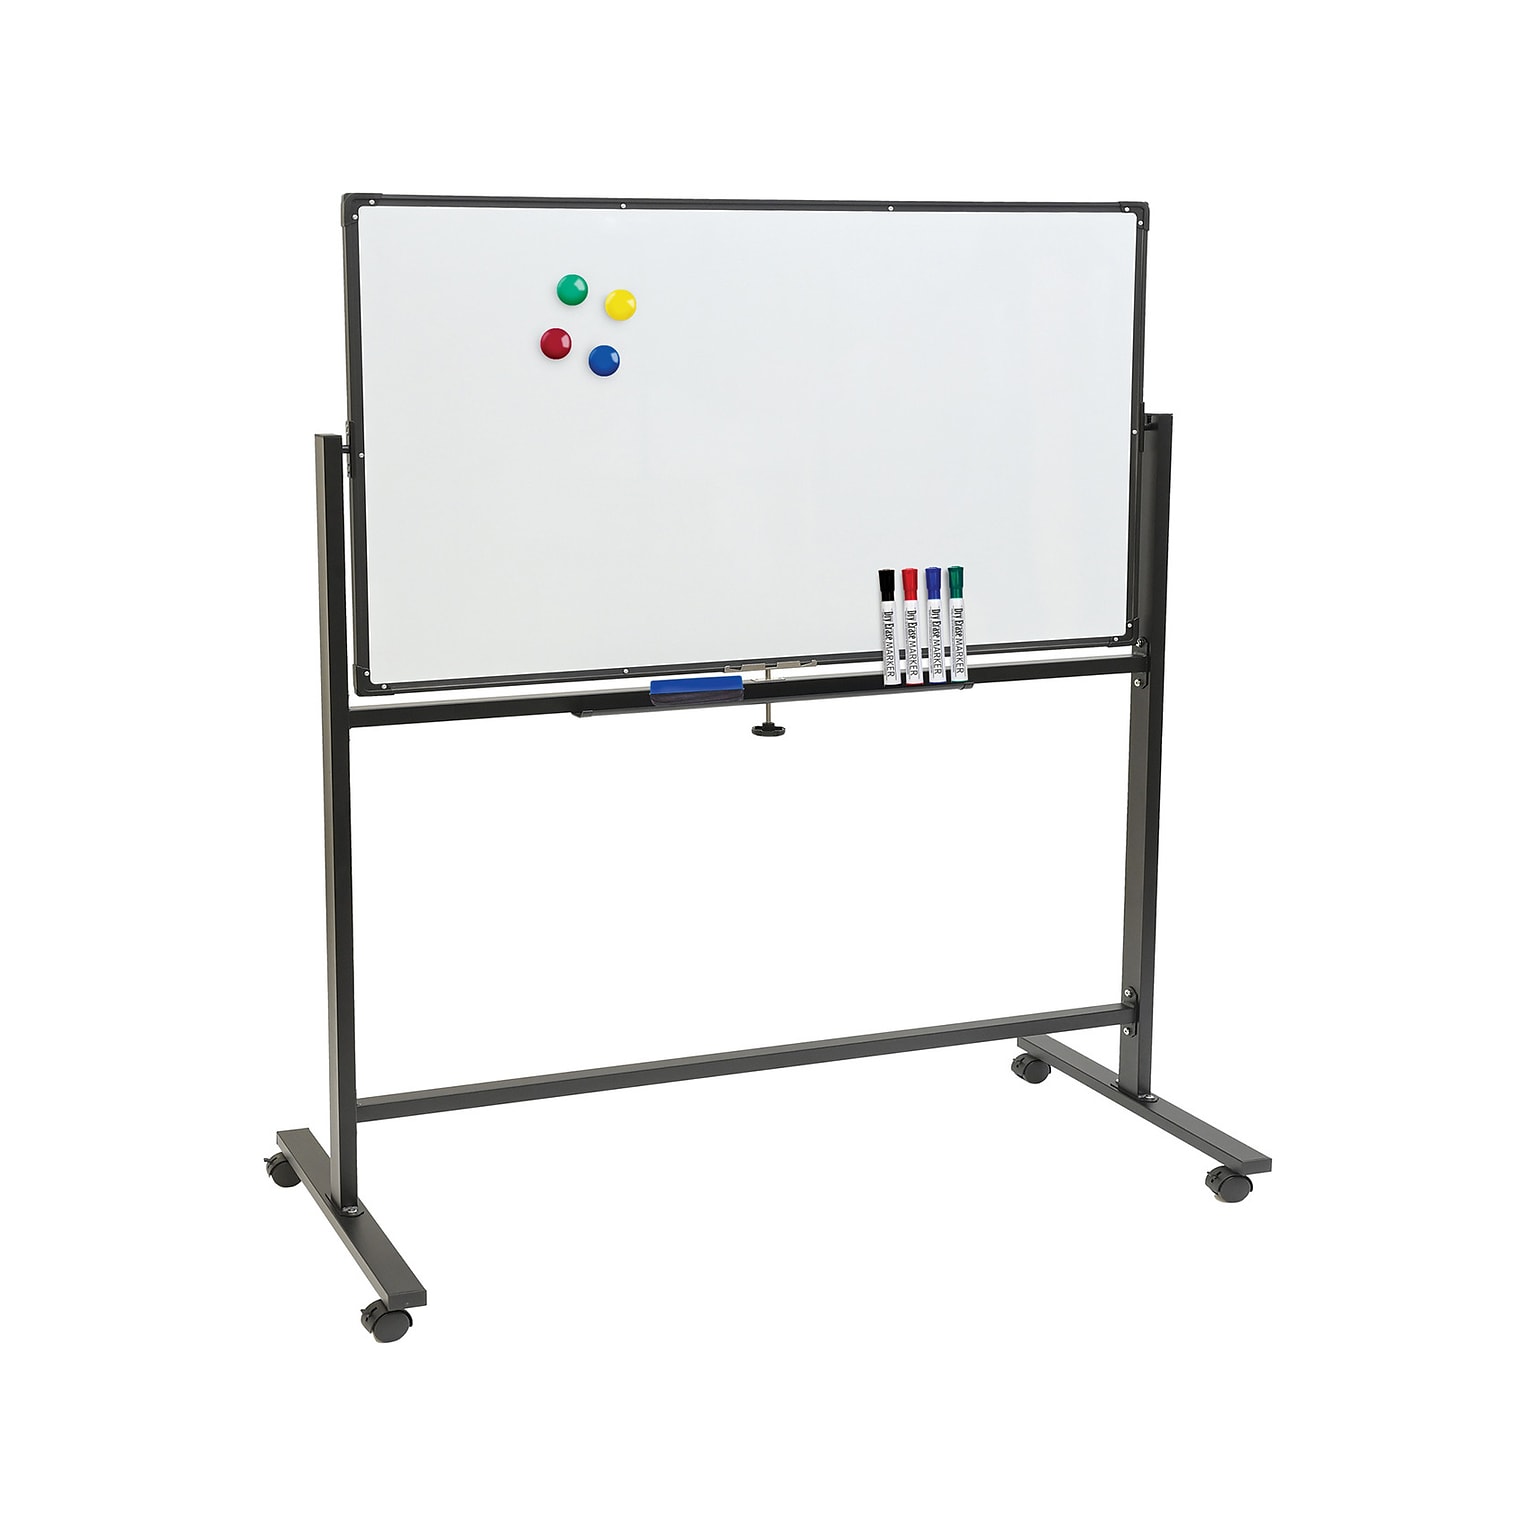 Excello Global Products Double Sided Magnetic Steel Mobile Dry-Erase Whiteboard, Aluminum Frame, 4 x 3 (EGP-HD-0066-BK)